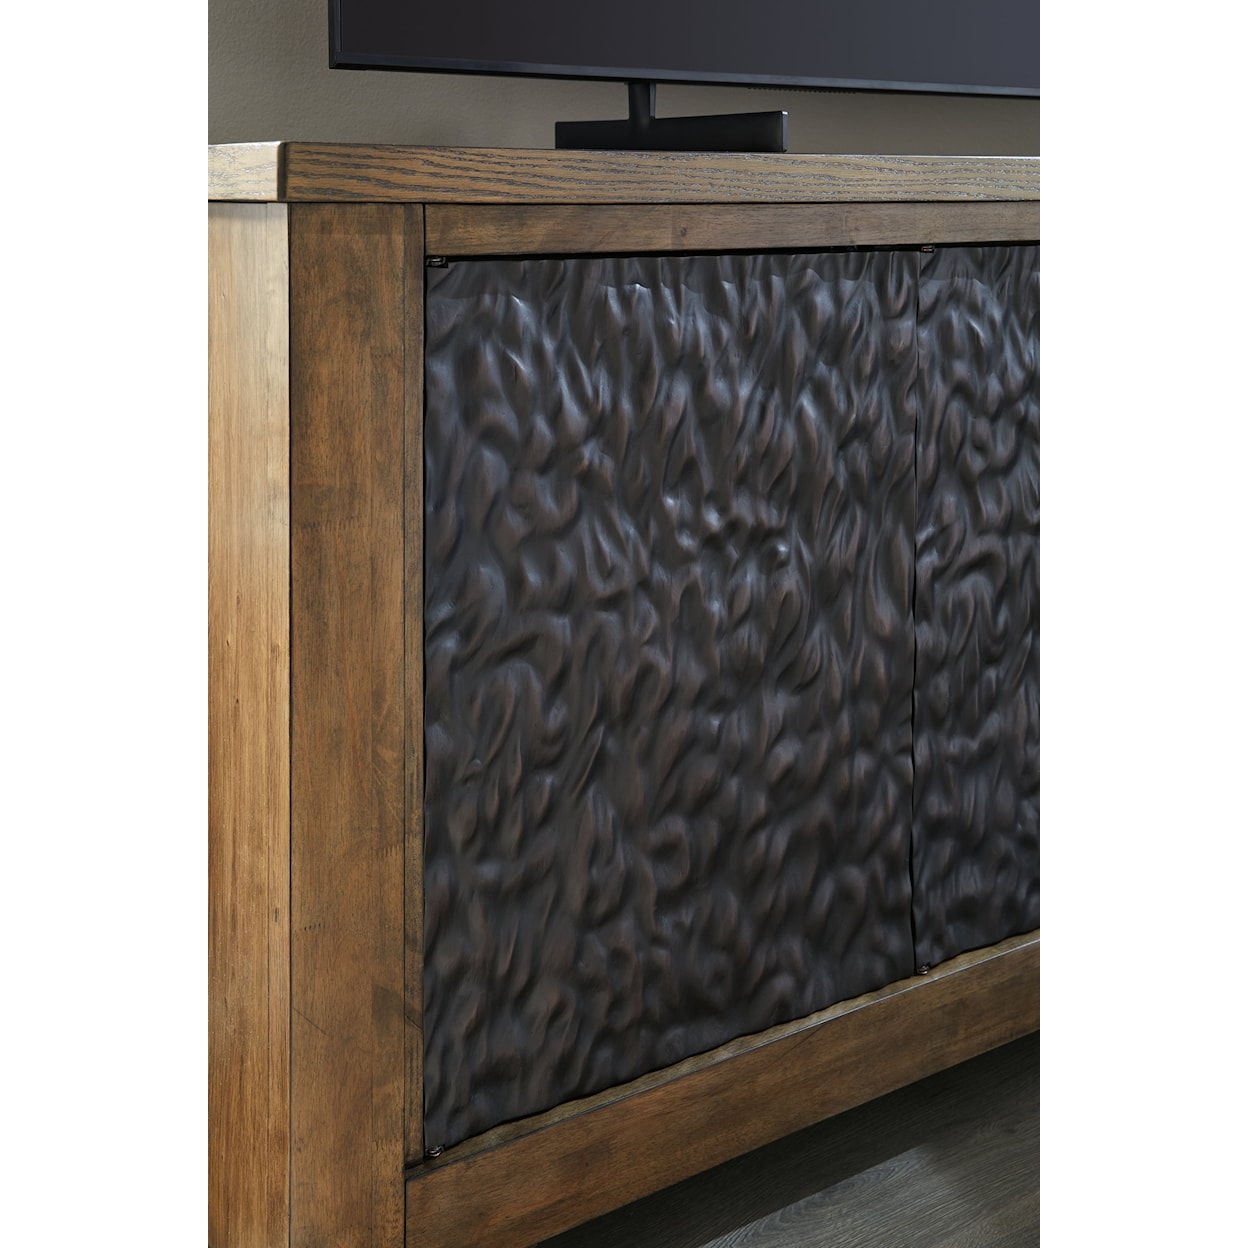 Signature Design by Ashley Rosswain 80" TV Stand